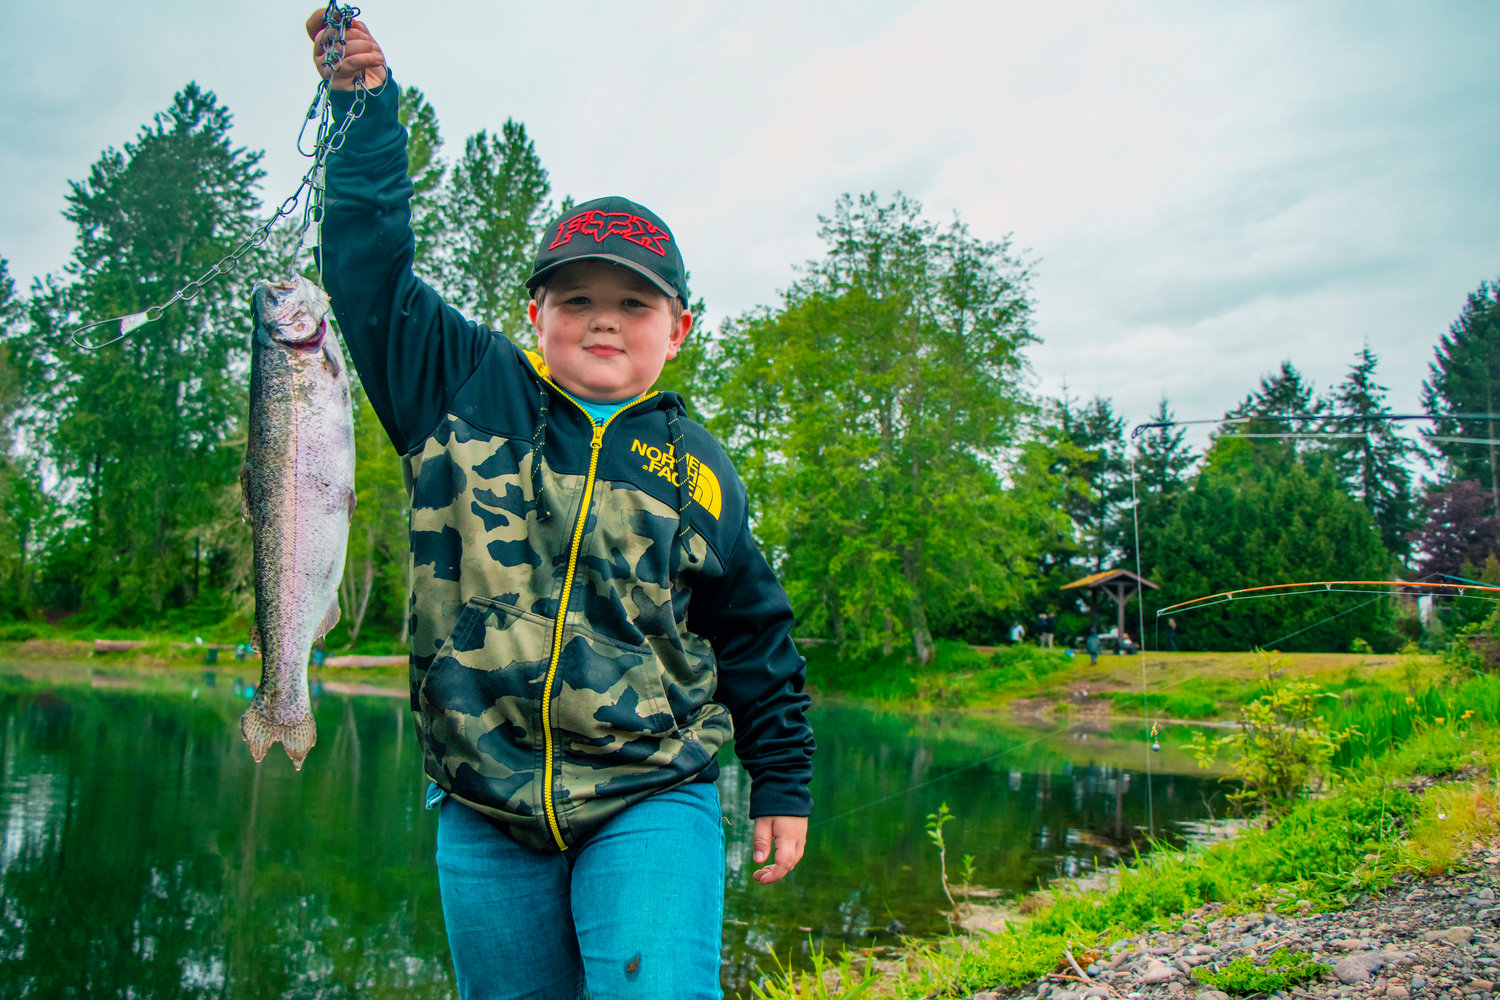 Photos: Young Anglers Reel in Catches at Annual Fishing Derby in Toledo